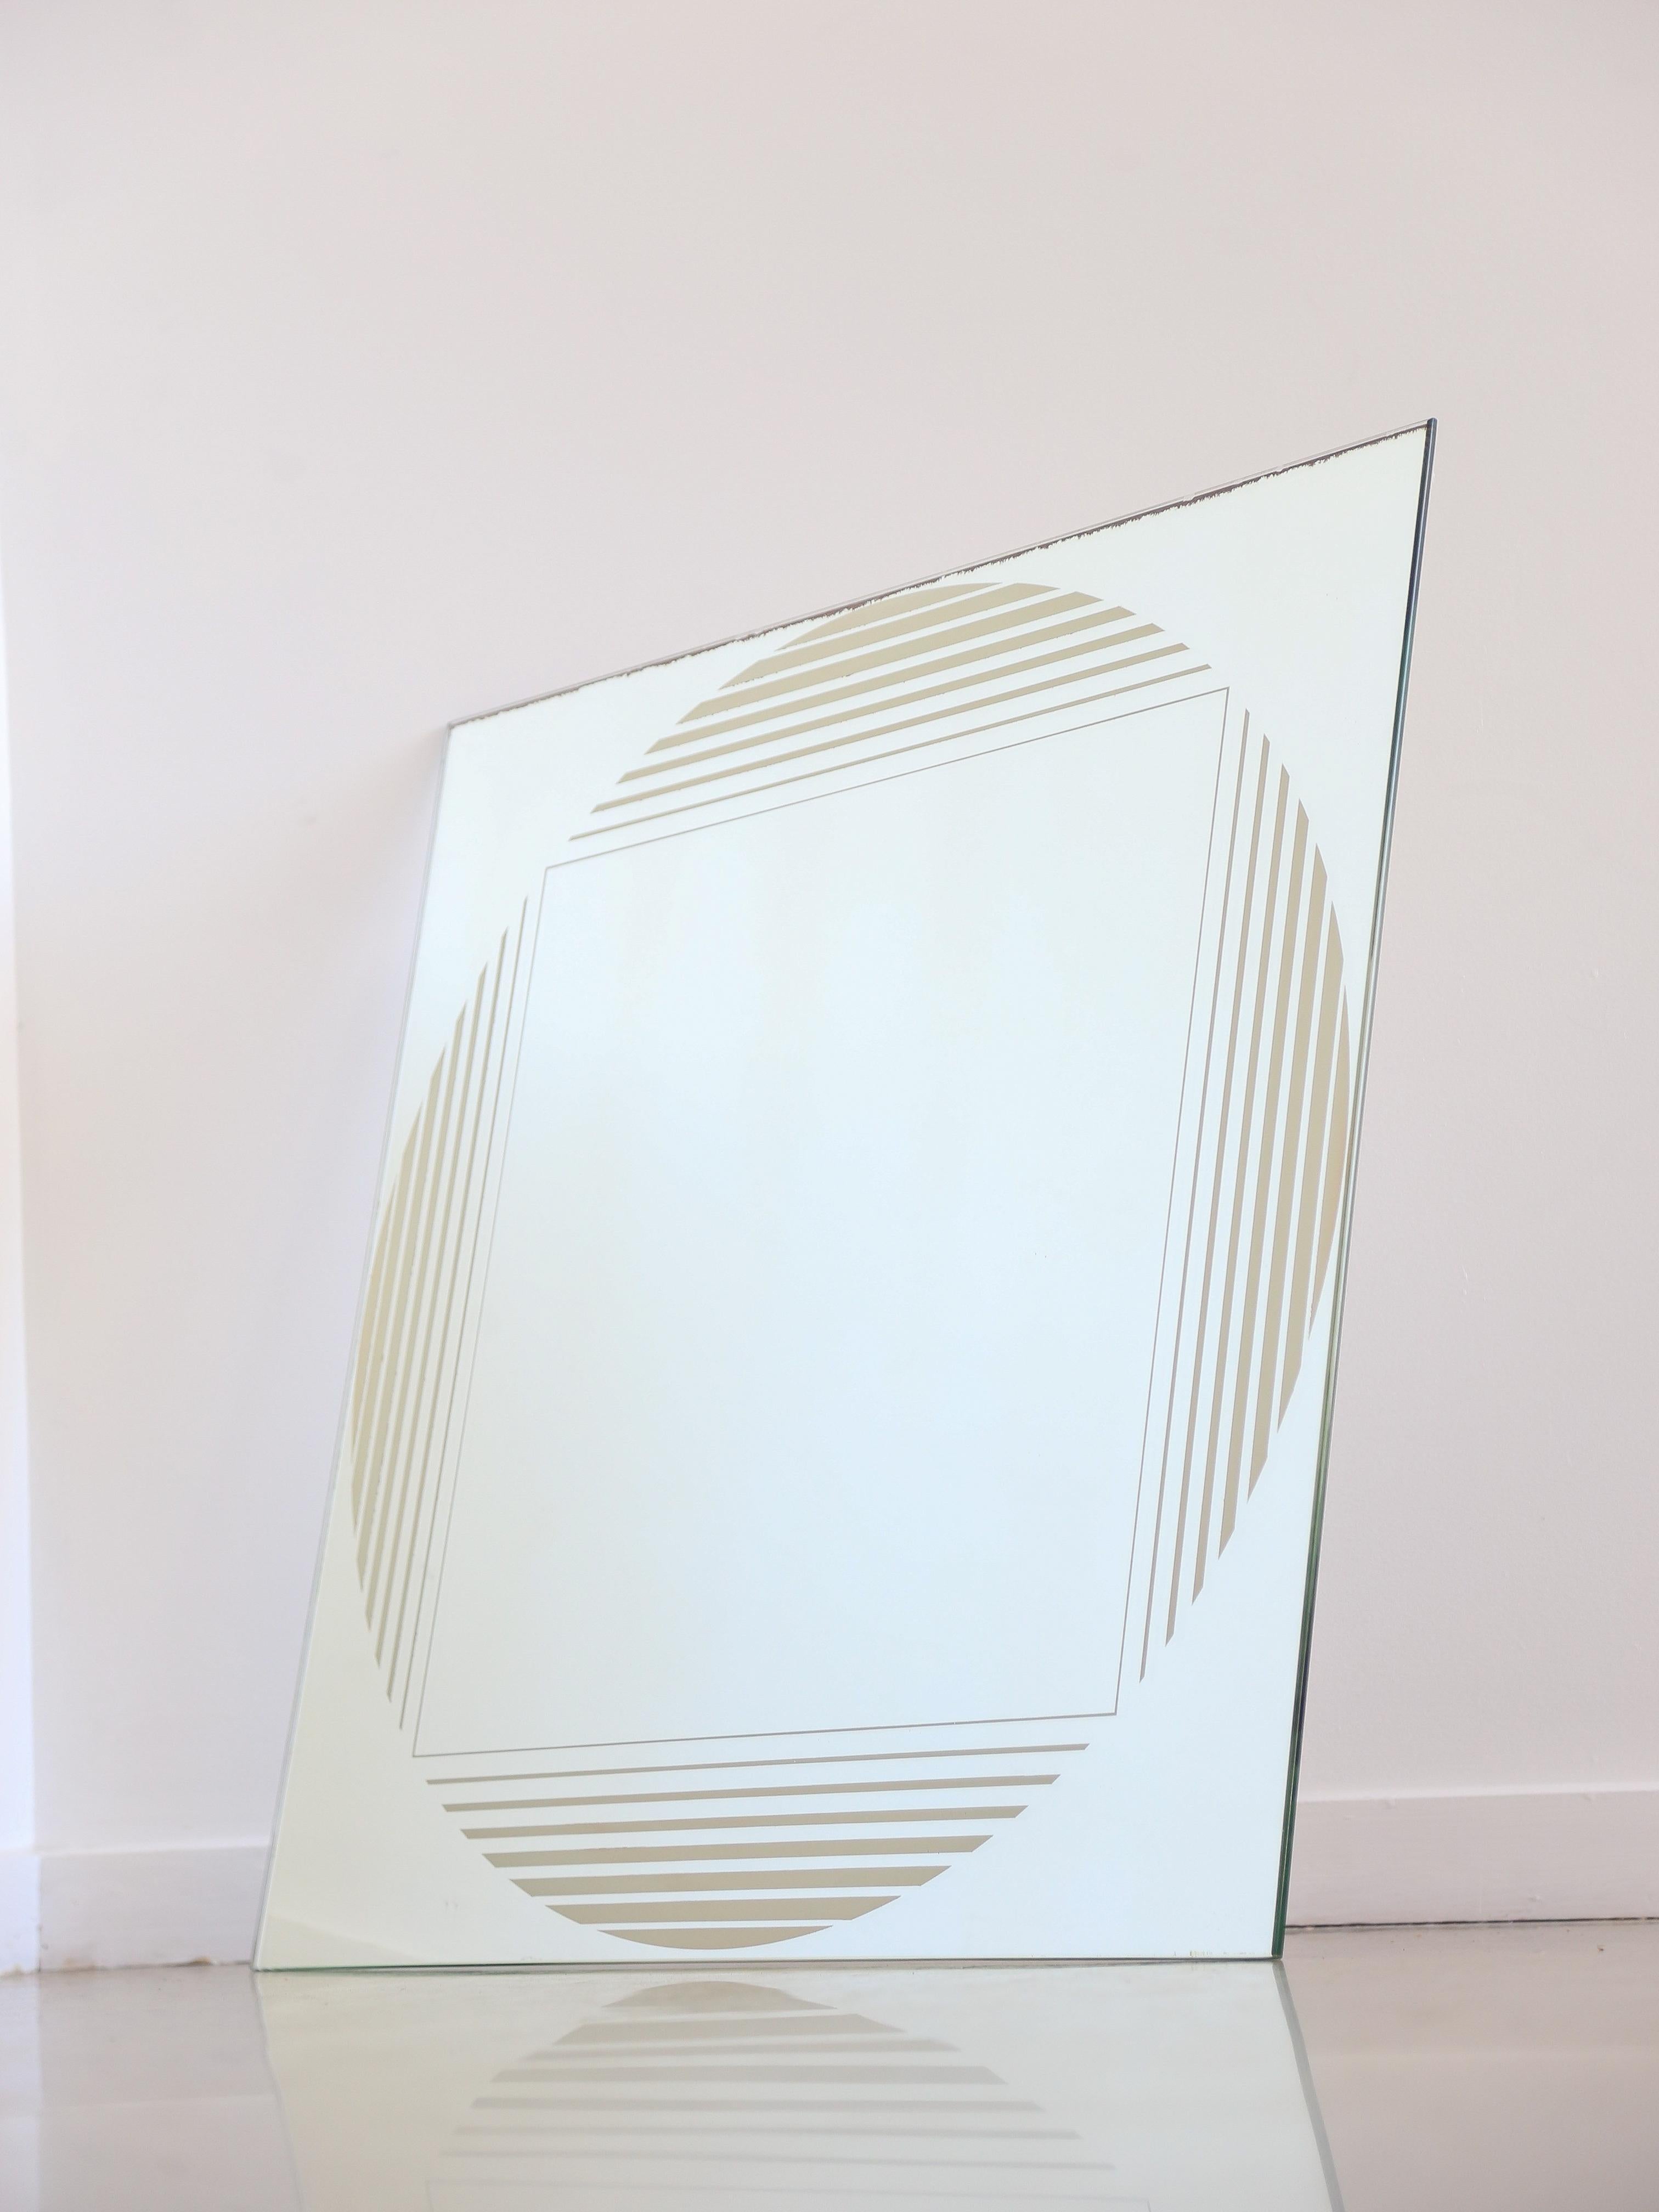 Gianni Celada for Fontana Arte wall mirror. 
Wall mirror by Gianni Celada for Fontana Arte, designed in '70s. The mirror has a screen printed decoration, geometrical silver theme.
Published in: L. Falconi, 